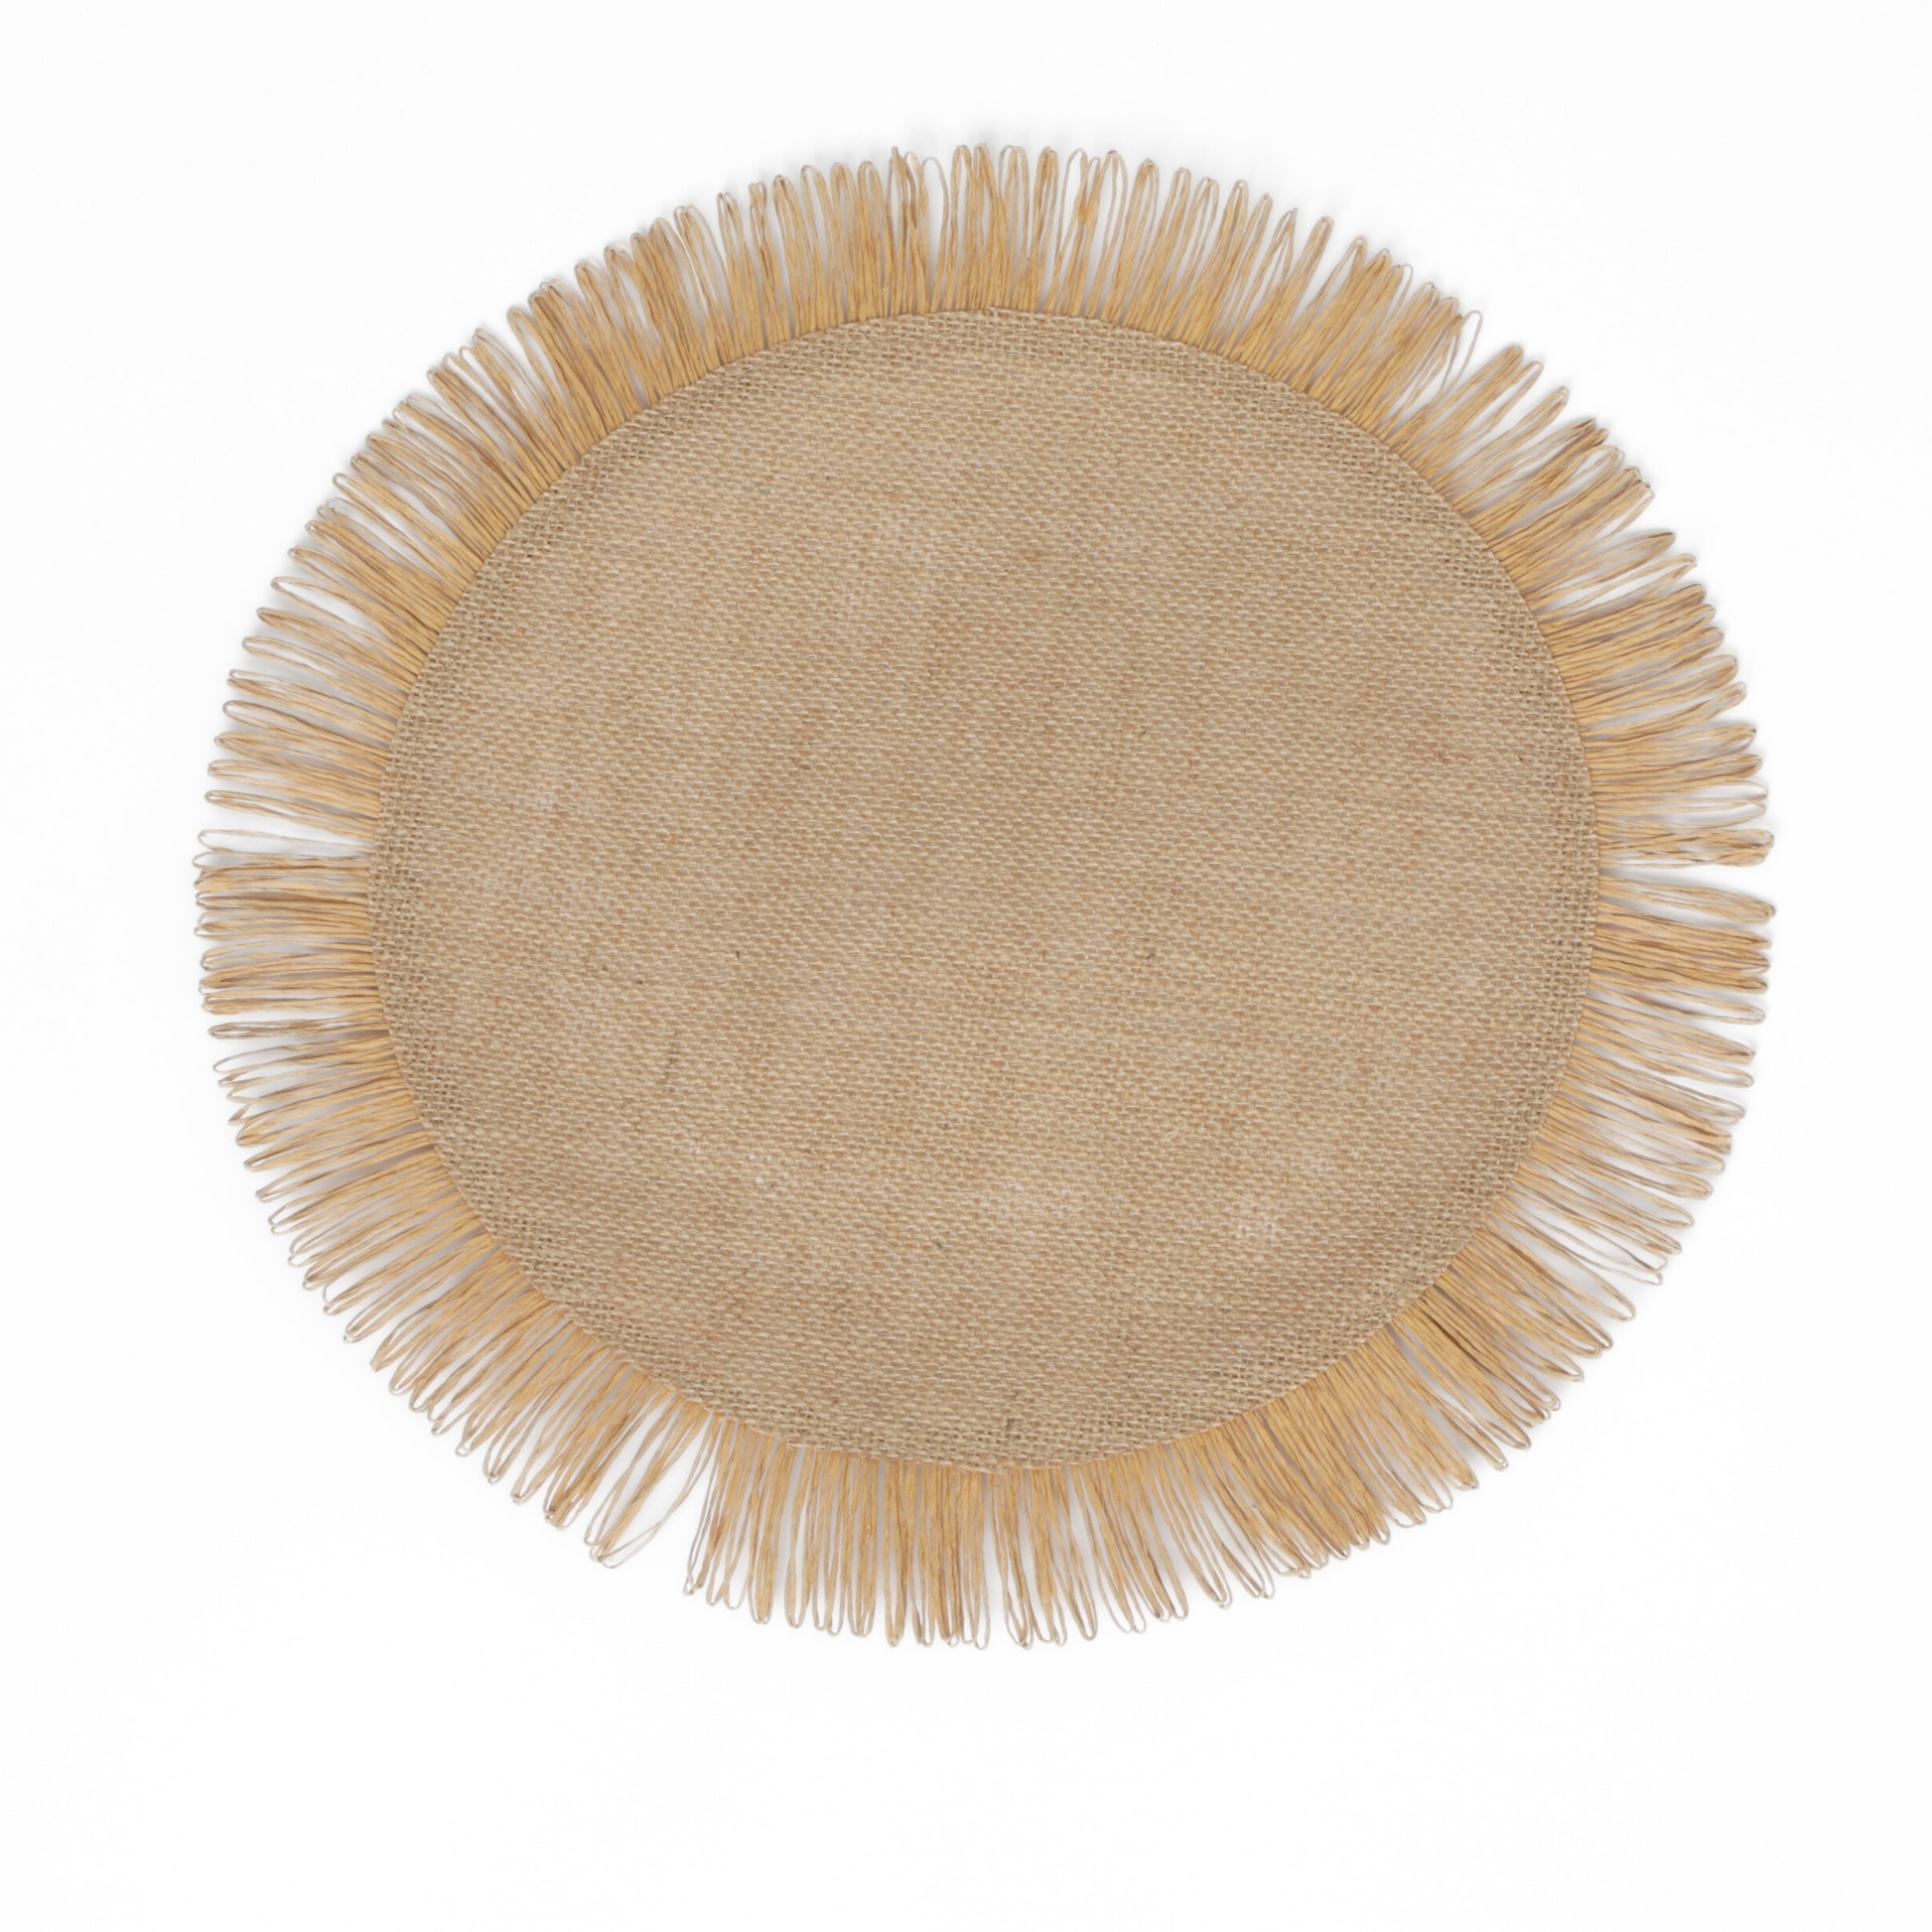 4 pc/set Fringed Edge Woven 15" Placemats